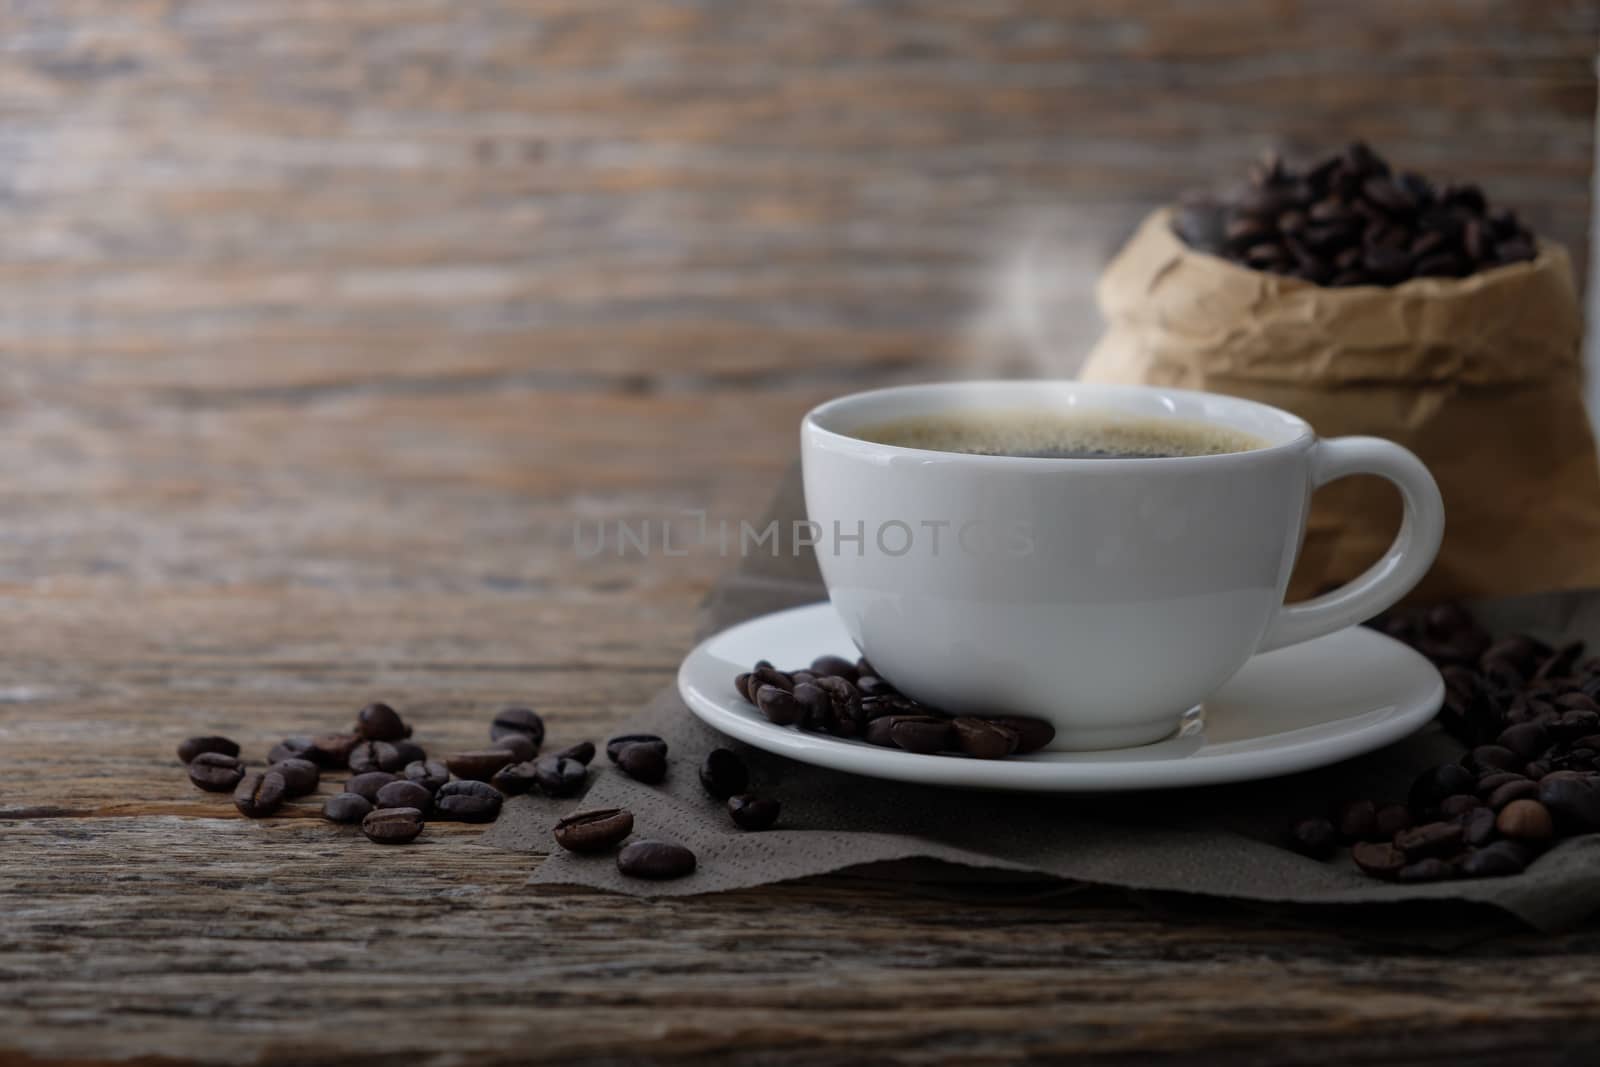 Hot Coffee cup with Coffee beans on the wooden table with copy space to write.